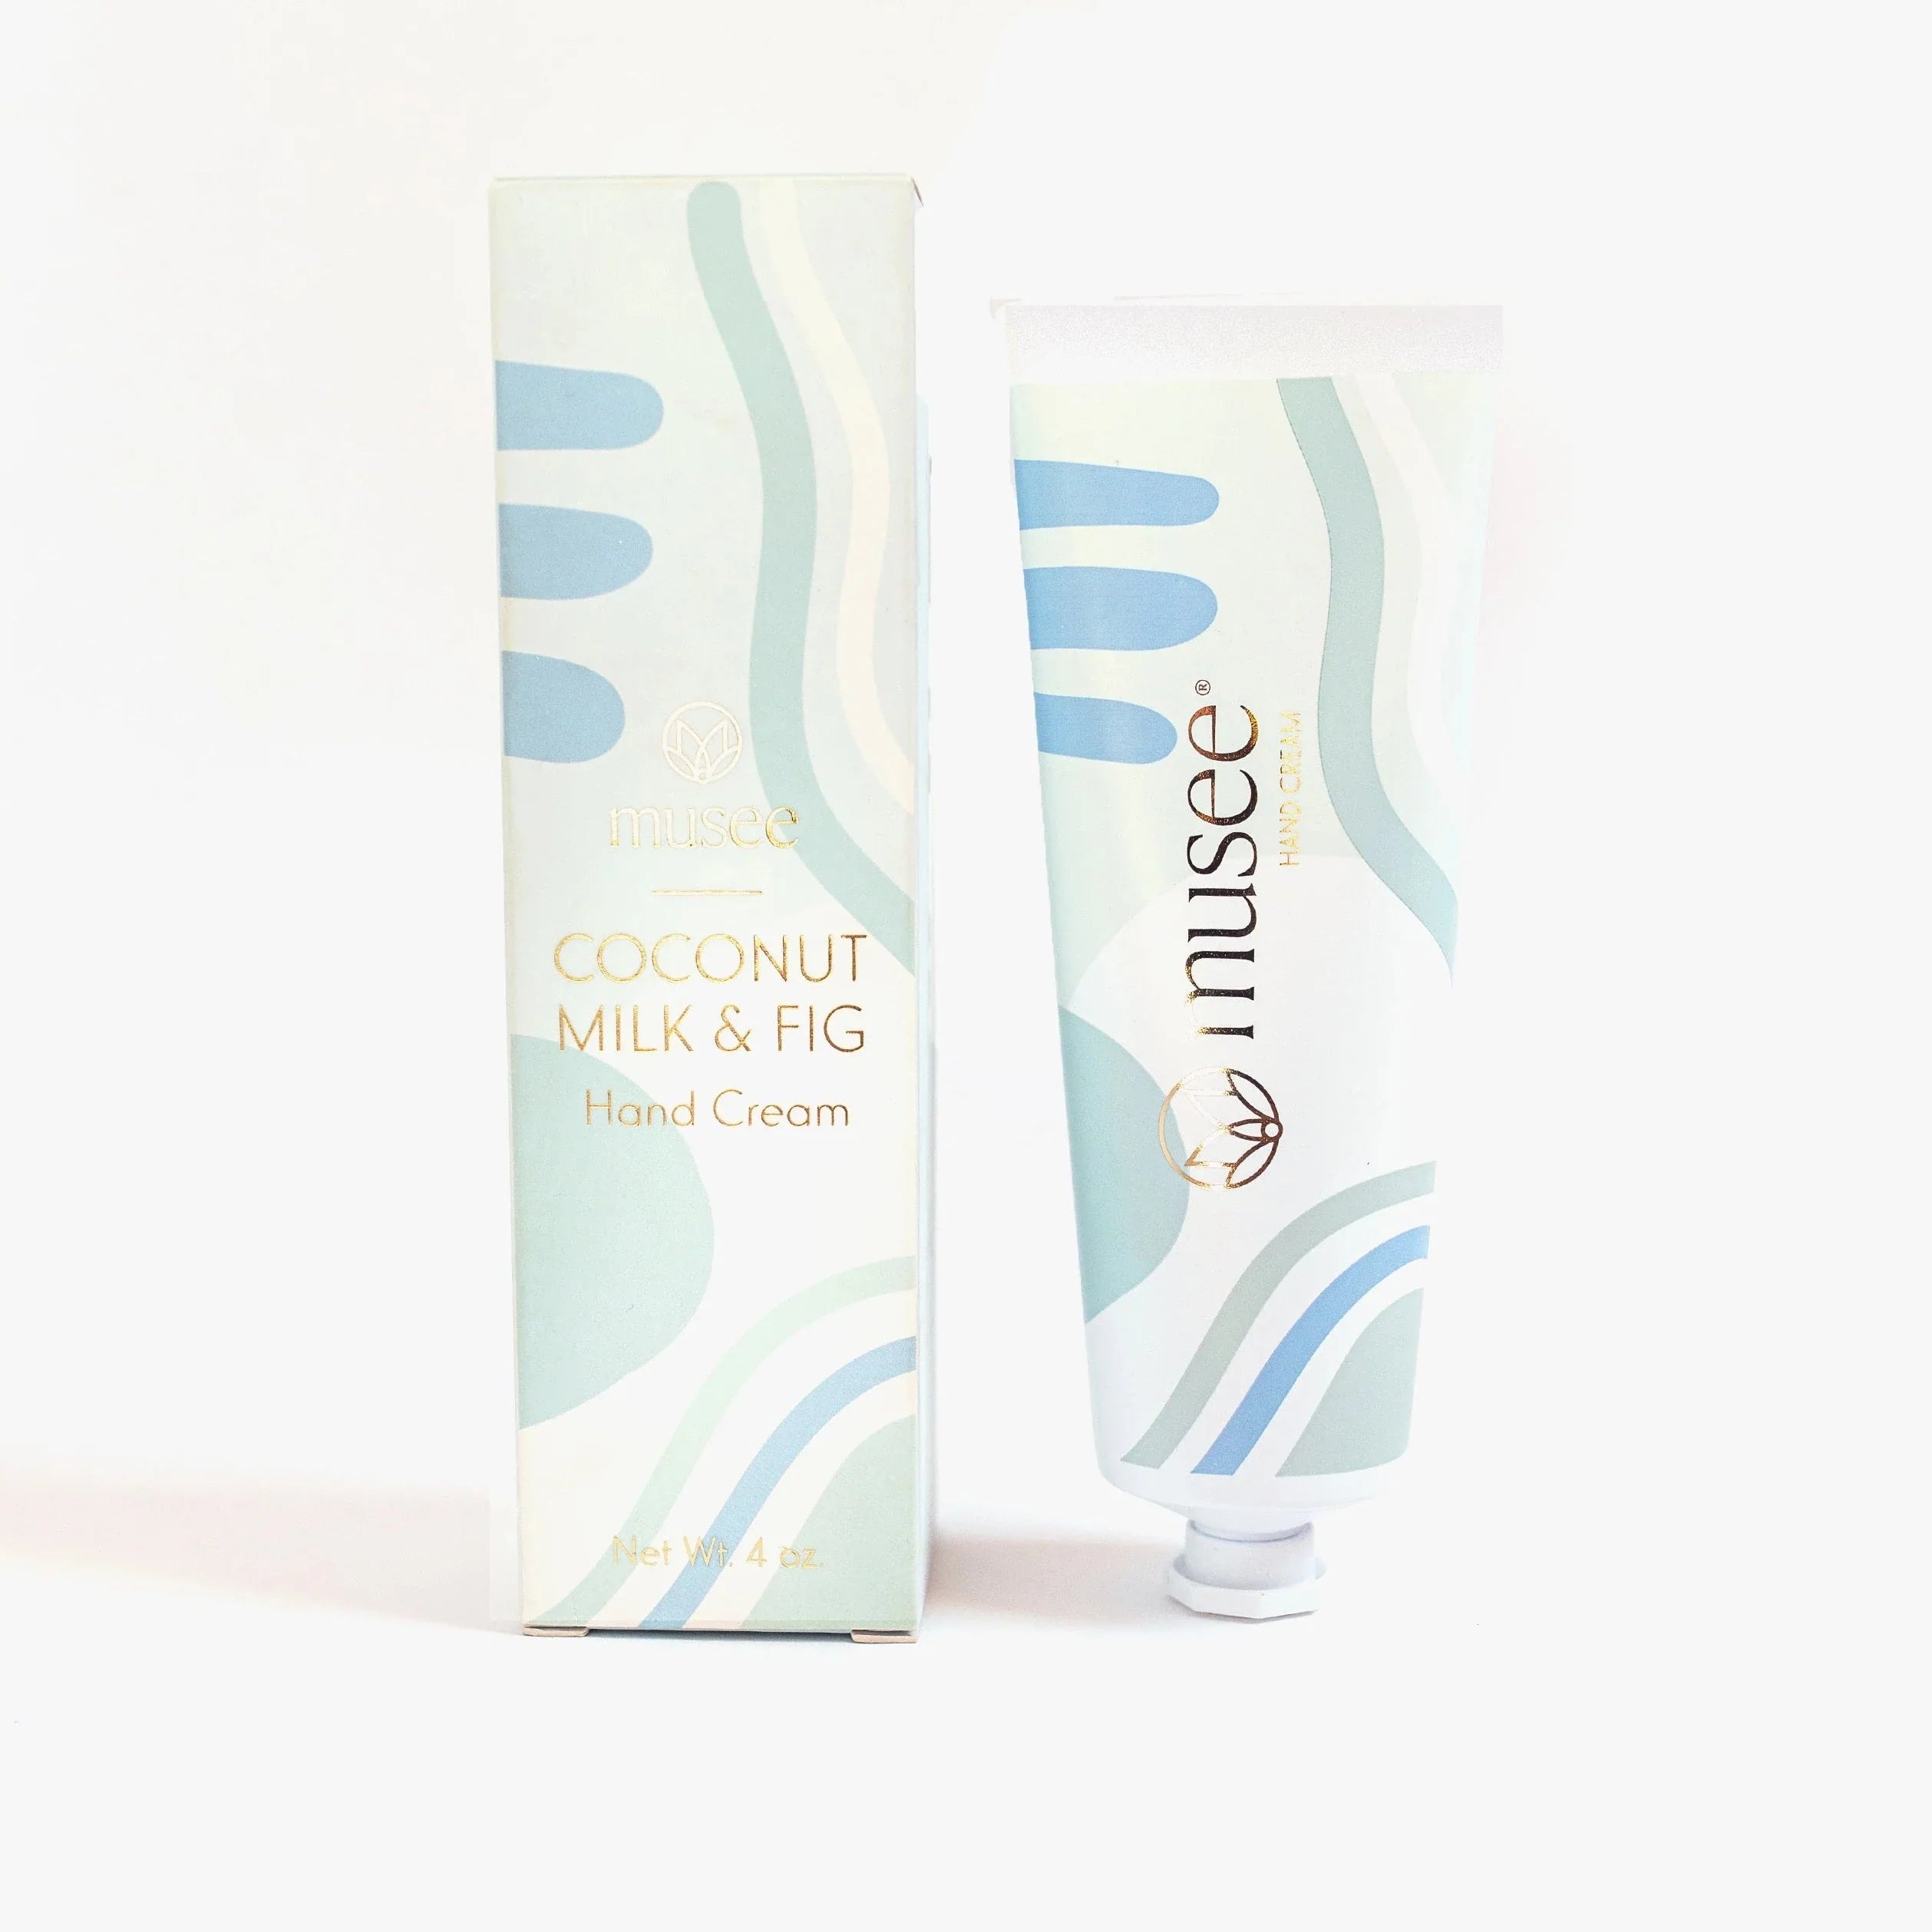 light green and blue abstract pattern on both the container and packaging of the coconut milk &amp; fig hand cream. box is to the left of the tube for the hand cream